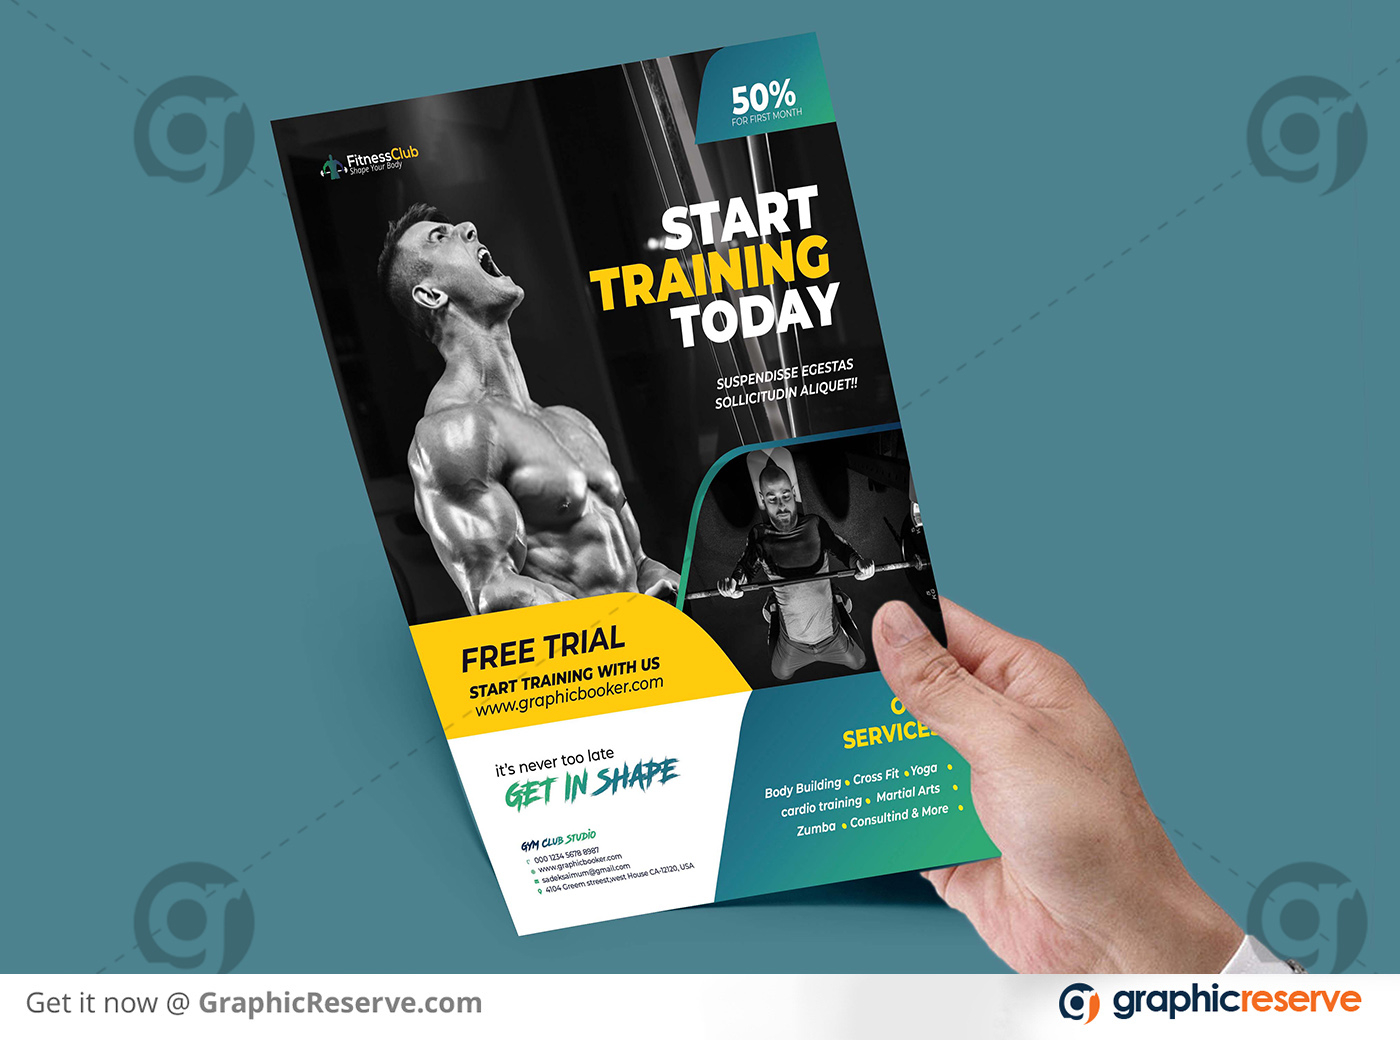 Fitness-GYM Flyer Template - Graphic Reserve Pertaining To Gym Open House Flyer Template With Regard To Gym Open House Flyer Template